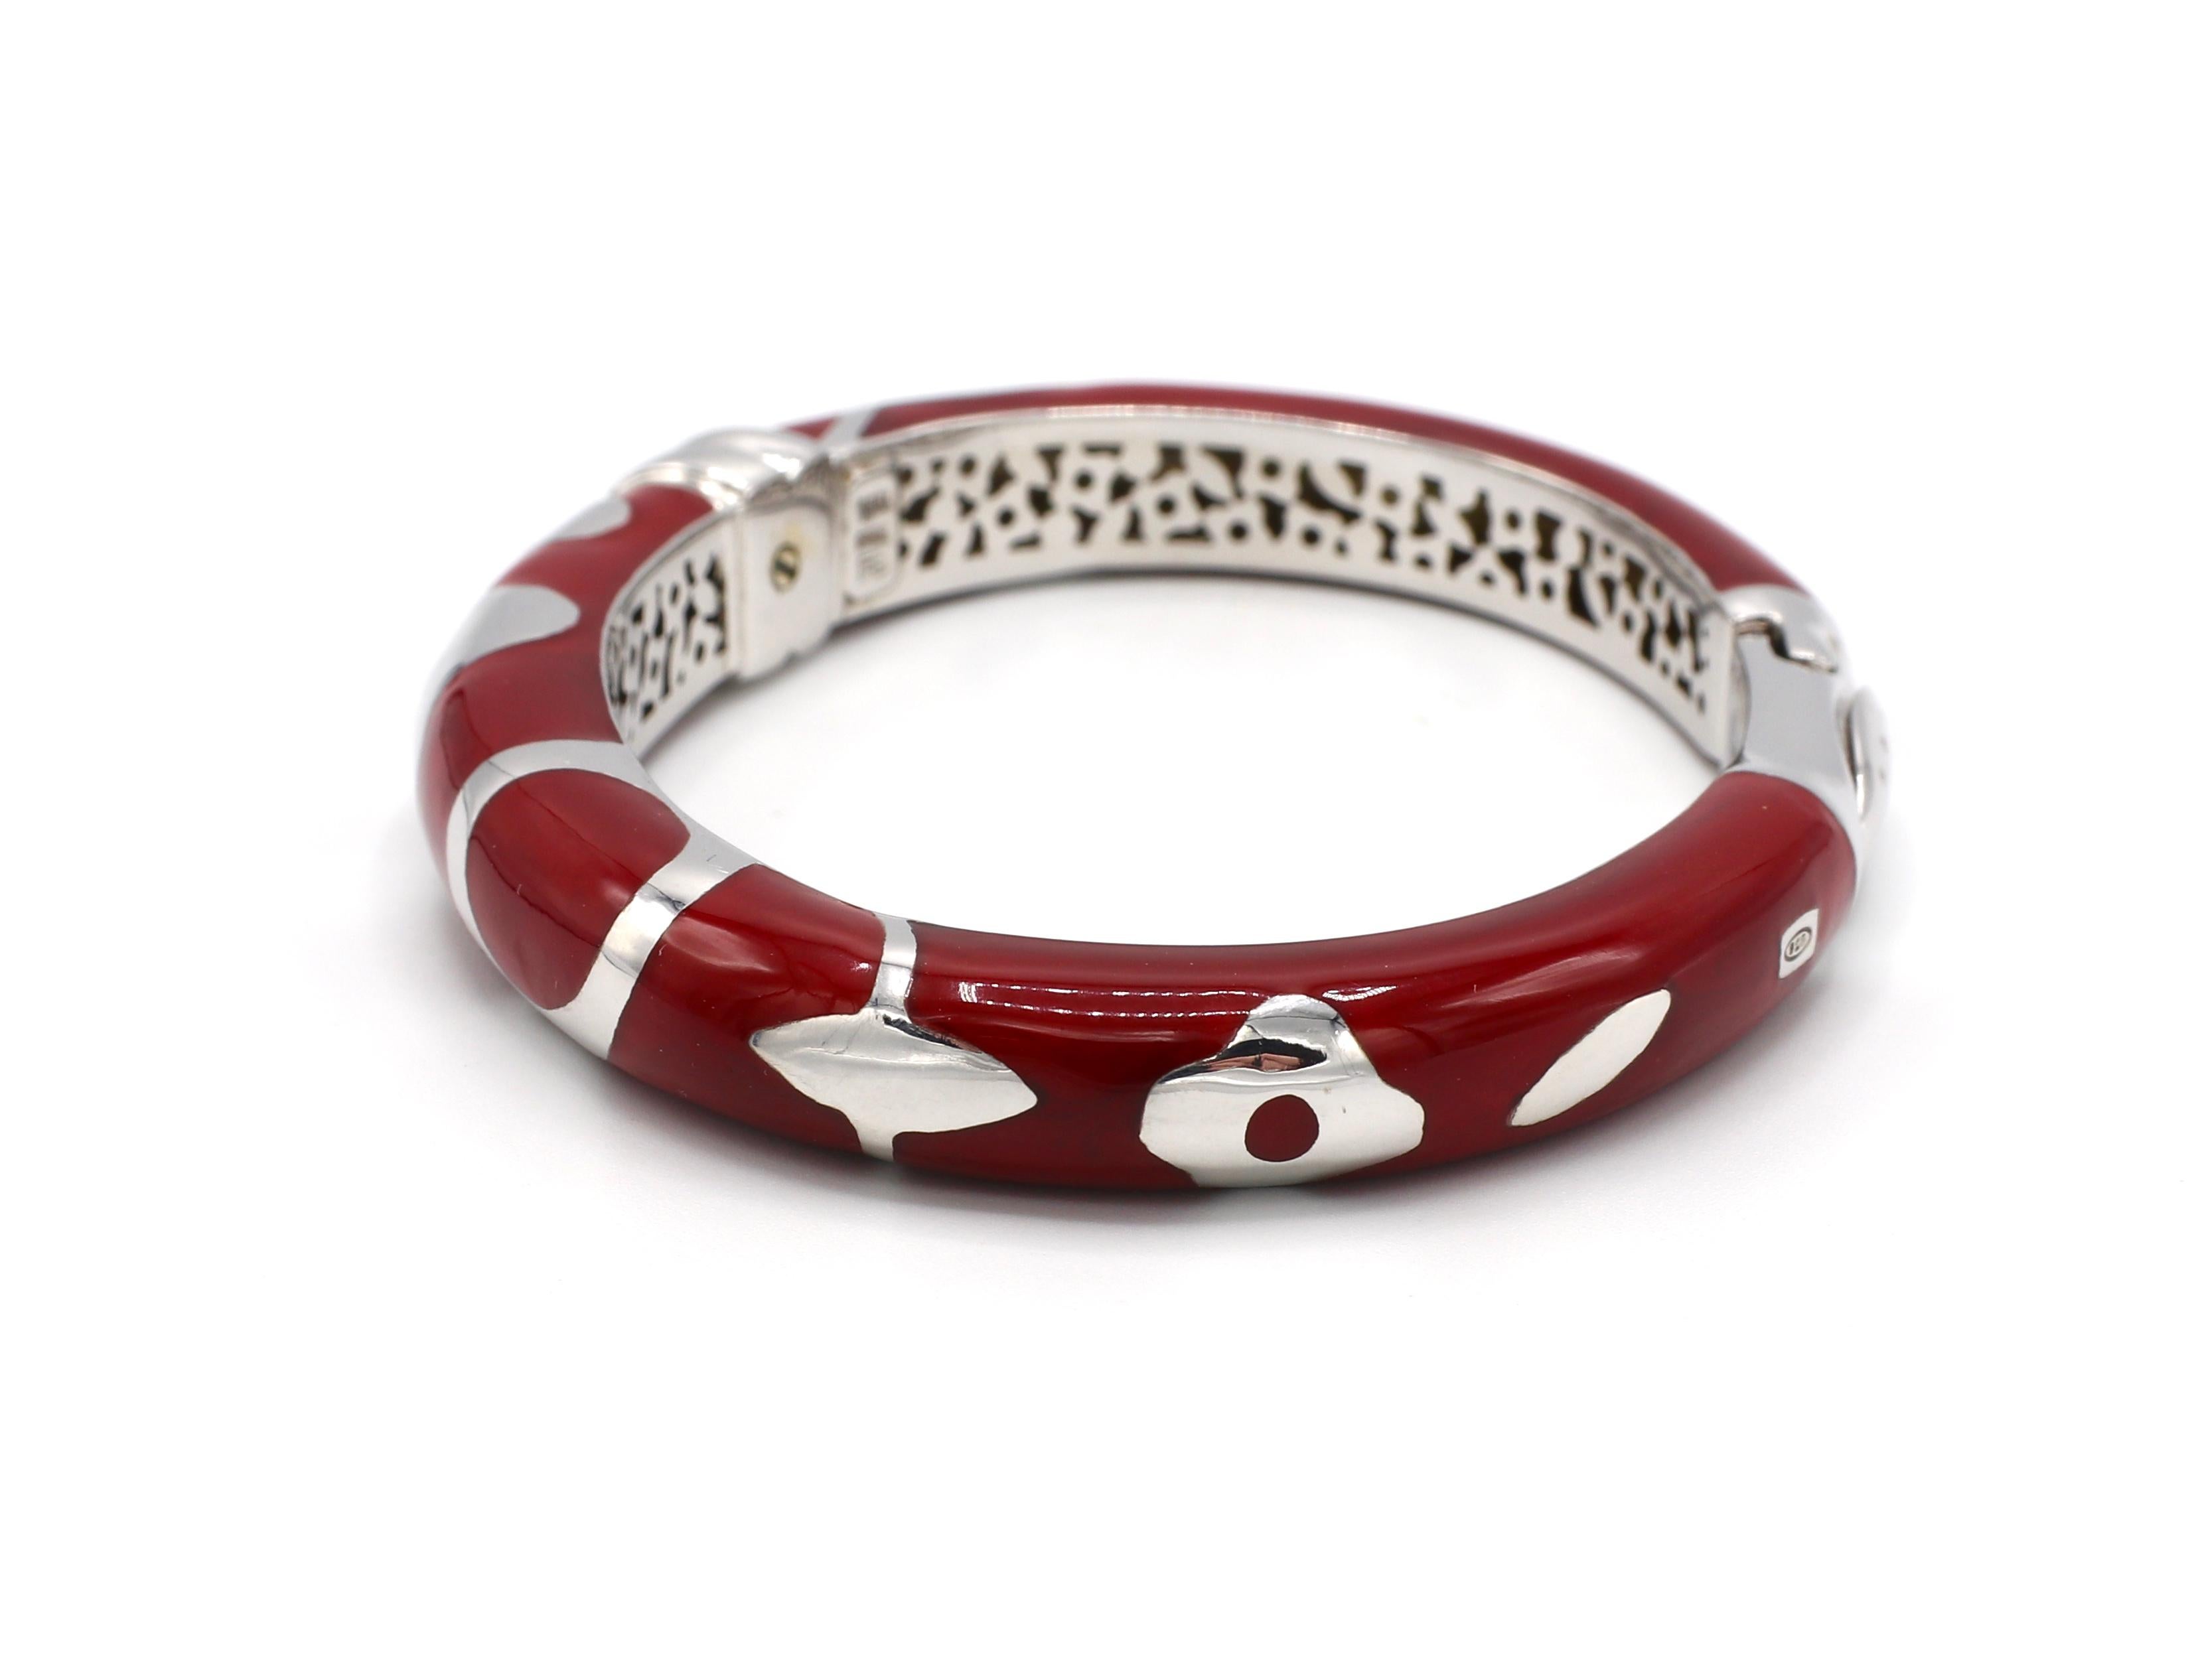 La Nouvelle Bague 18K White Gold & Sterling Silver Enamel Bangle Bracelet 

Metal: 18K Gold & Sterling Silver
Weight: 36.5 grams
Diameter: 2.87 inches
Width: 9.3mm at top, 7mm at base 
Box, pouch & papers included as pictured 